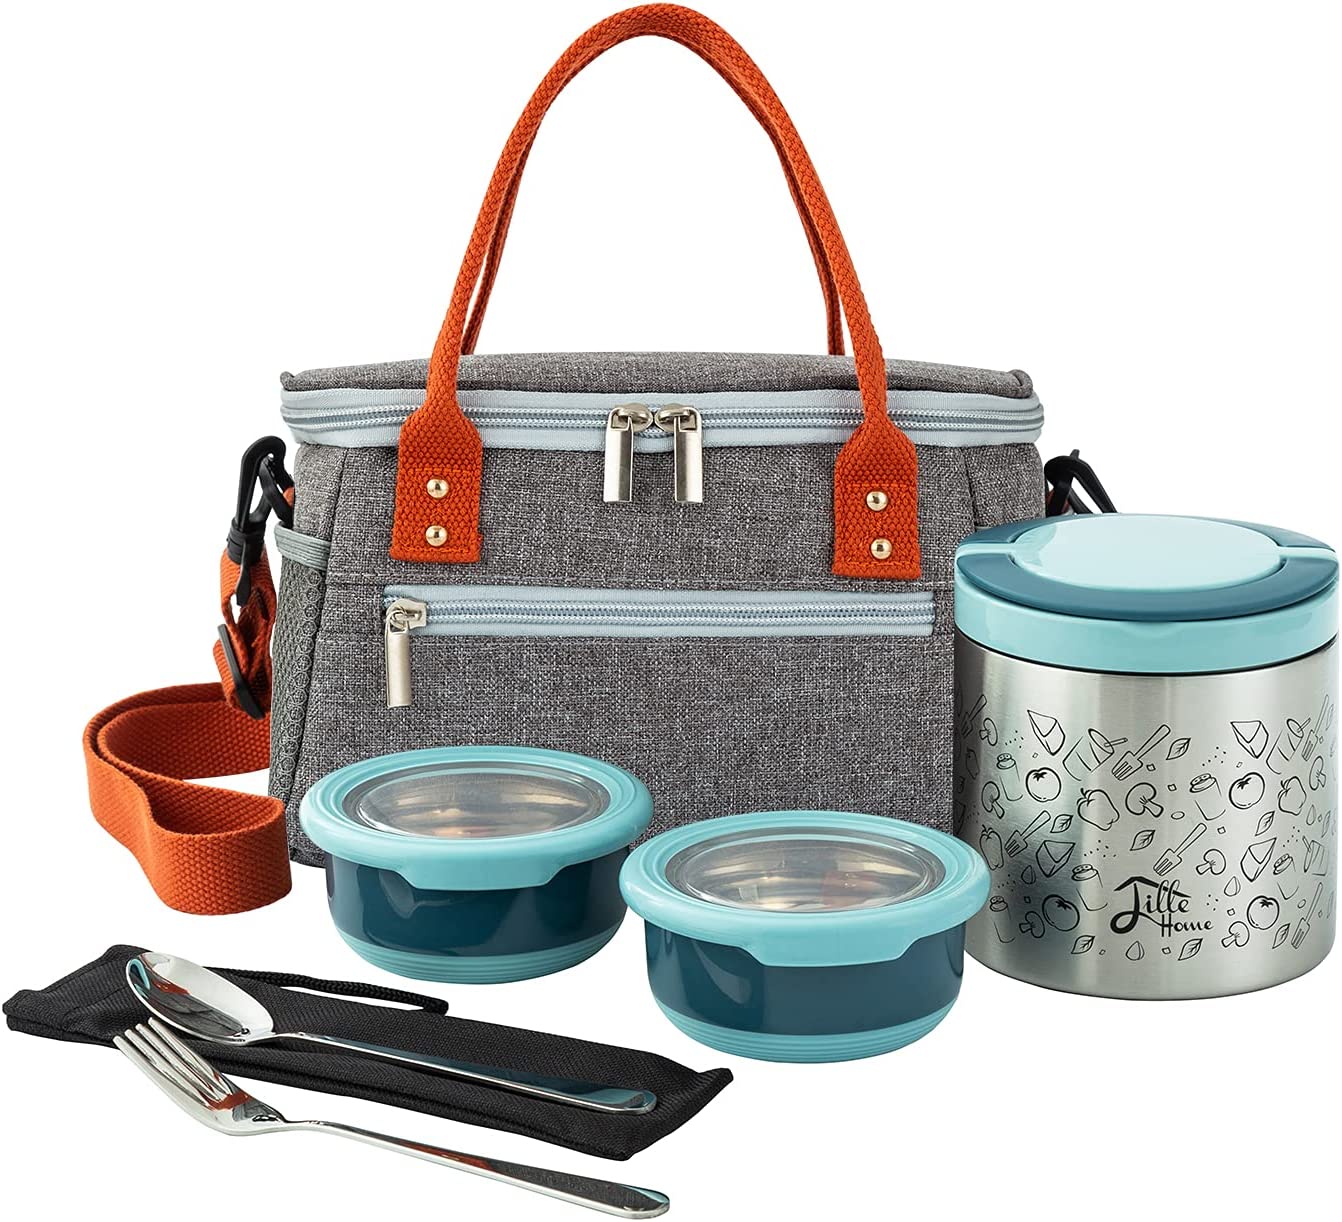 Lille Home Lunch Box Set, A Vacuum Insulated Bento/Snack Box Keeping Food Warm for 4-6 Hours, Two Stainless Steel Food Containers, A Lunch Bag, A Portable Cutlery Set